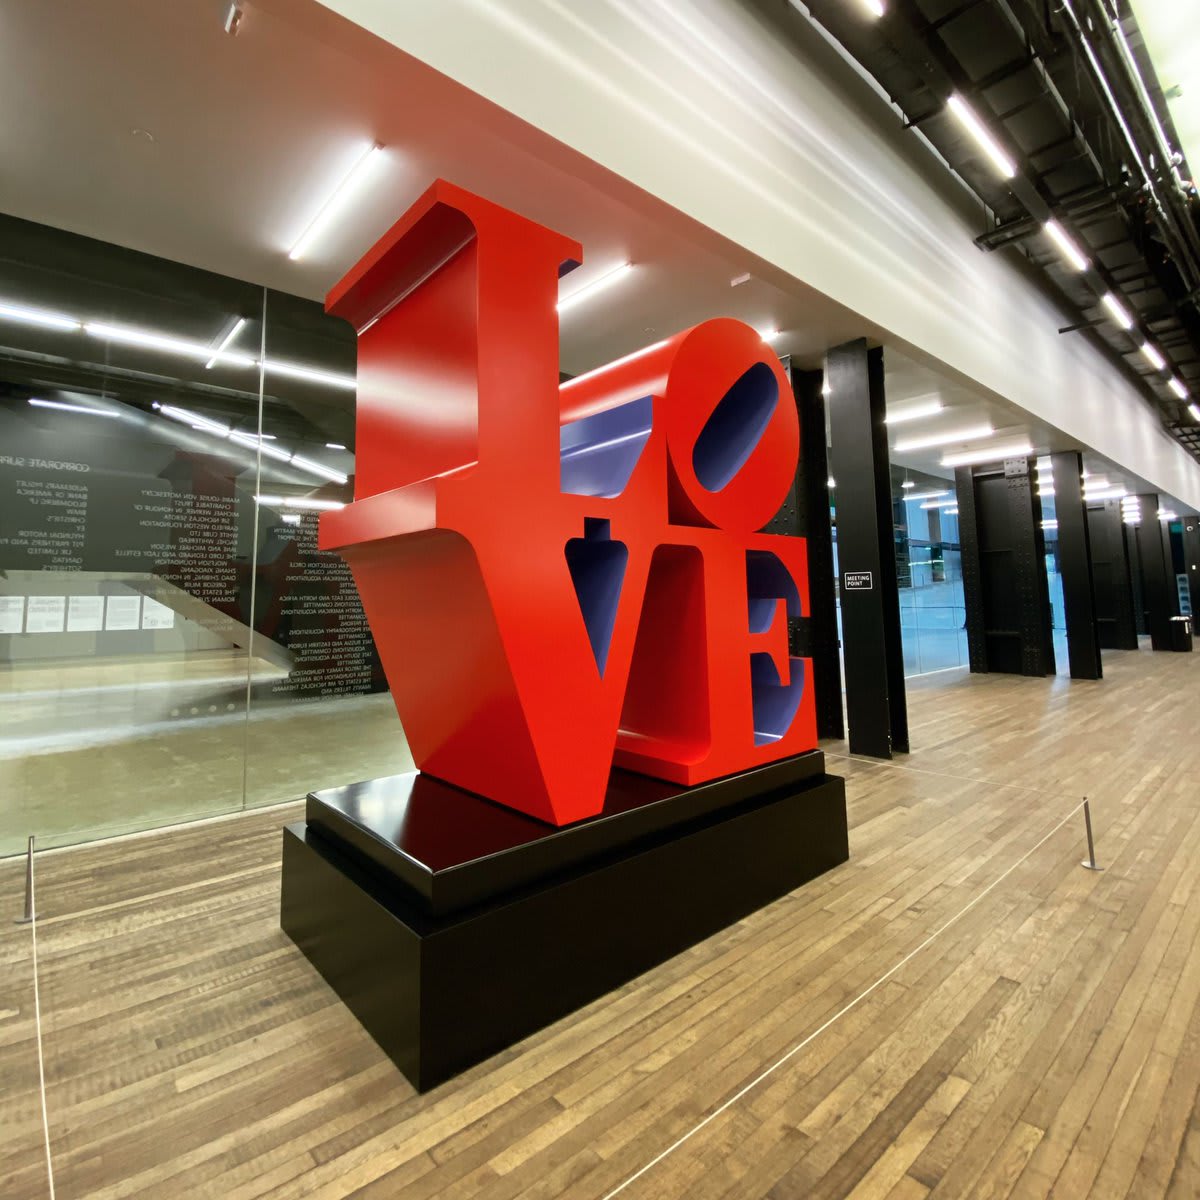 Robert Indiana was born in Indiana onthisday in 1928. ❤️ Born Robert Clark, Indiana took his native state's name on moving to New York in 1954, a gesture that started his fascination with America, signage & the power of words. LOVE Red Violet 1966-98 on display at Tate Modern.